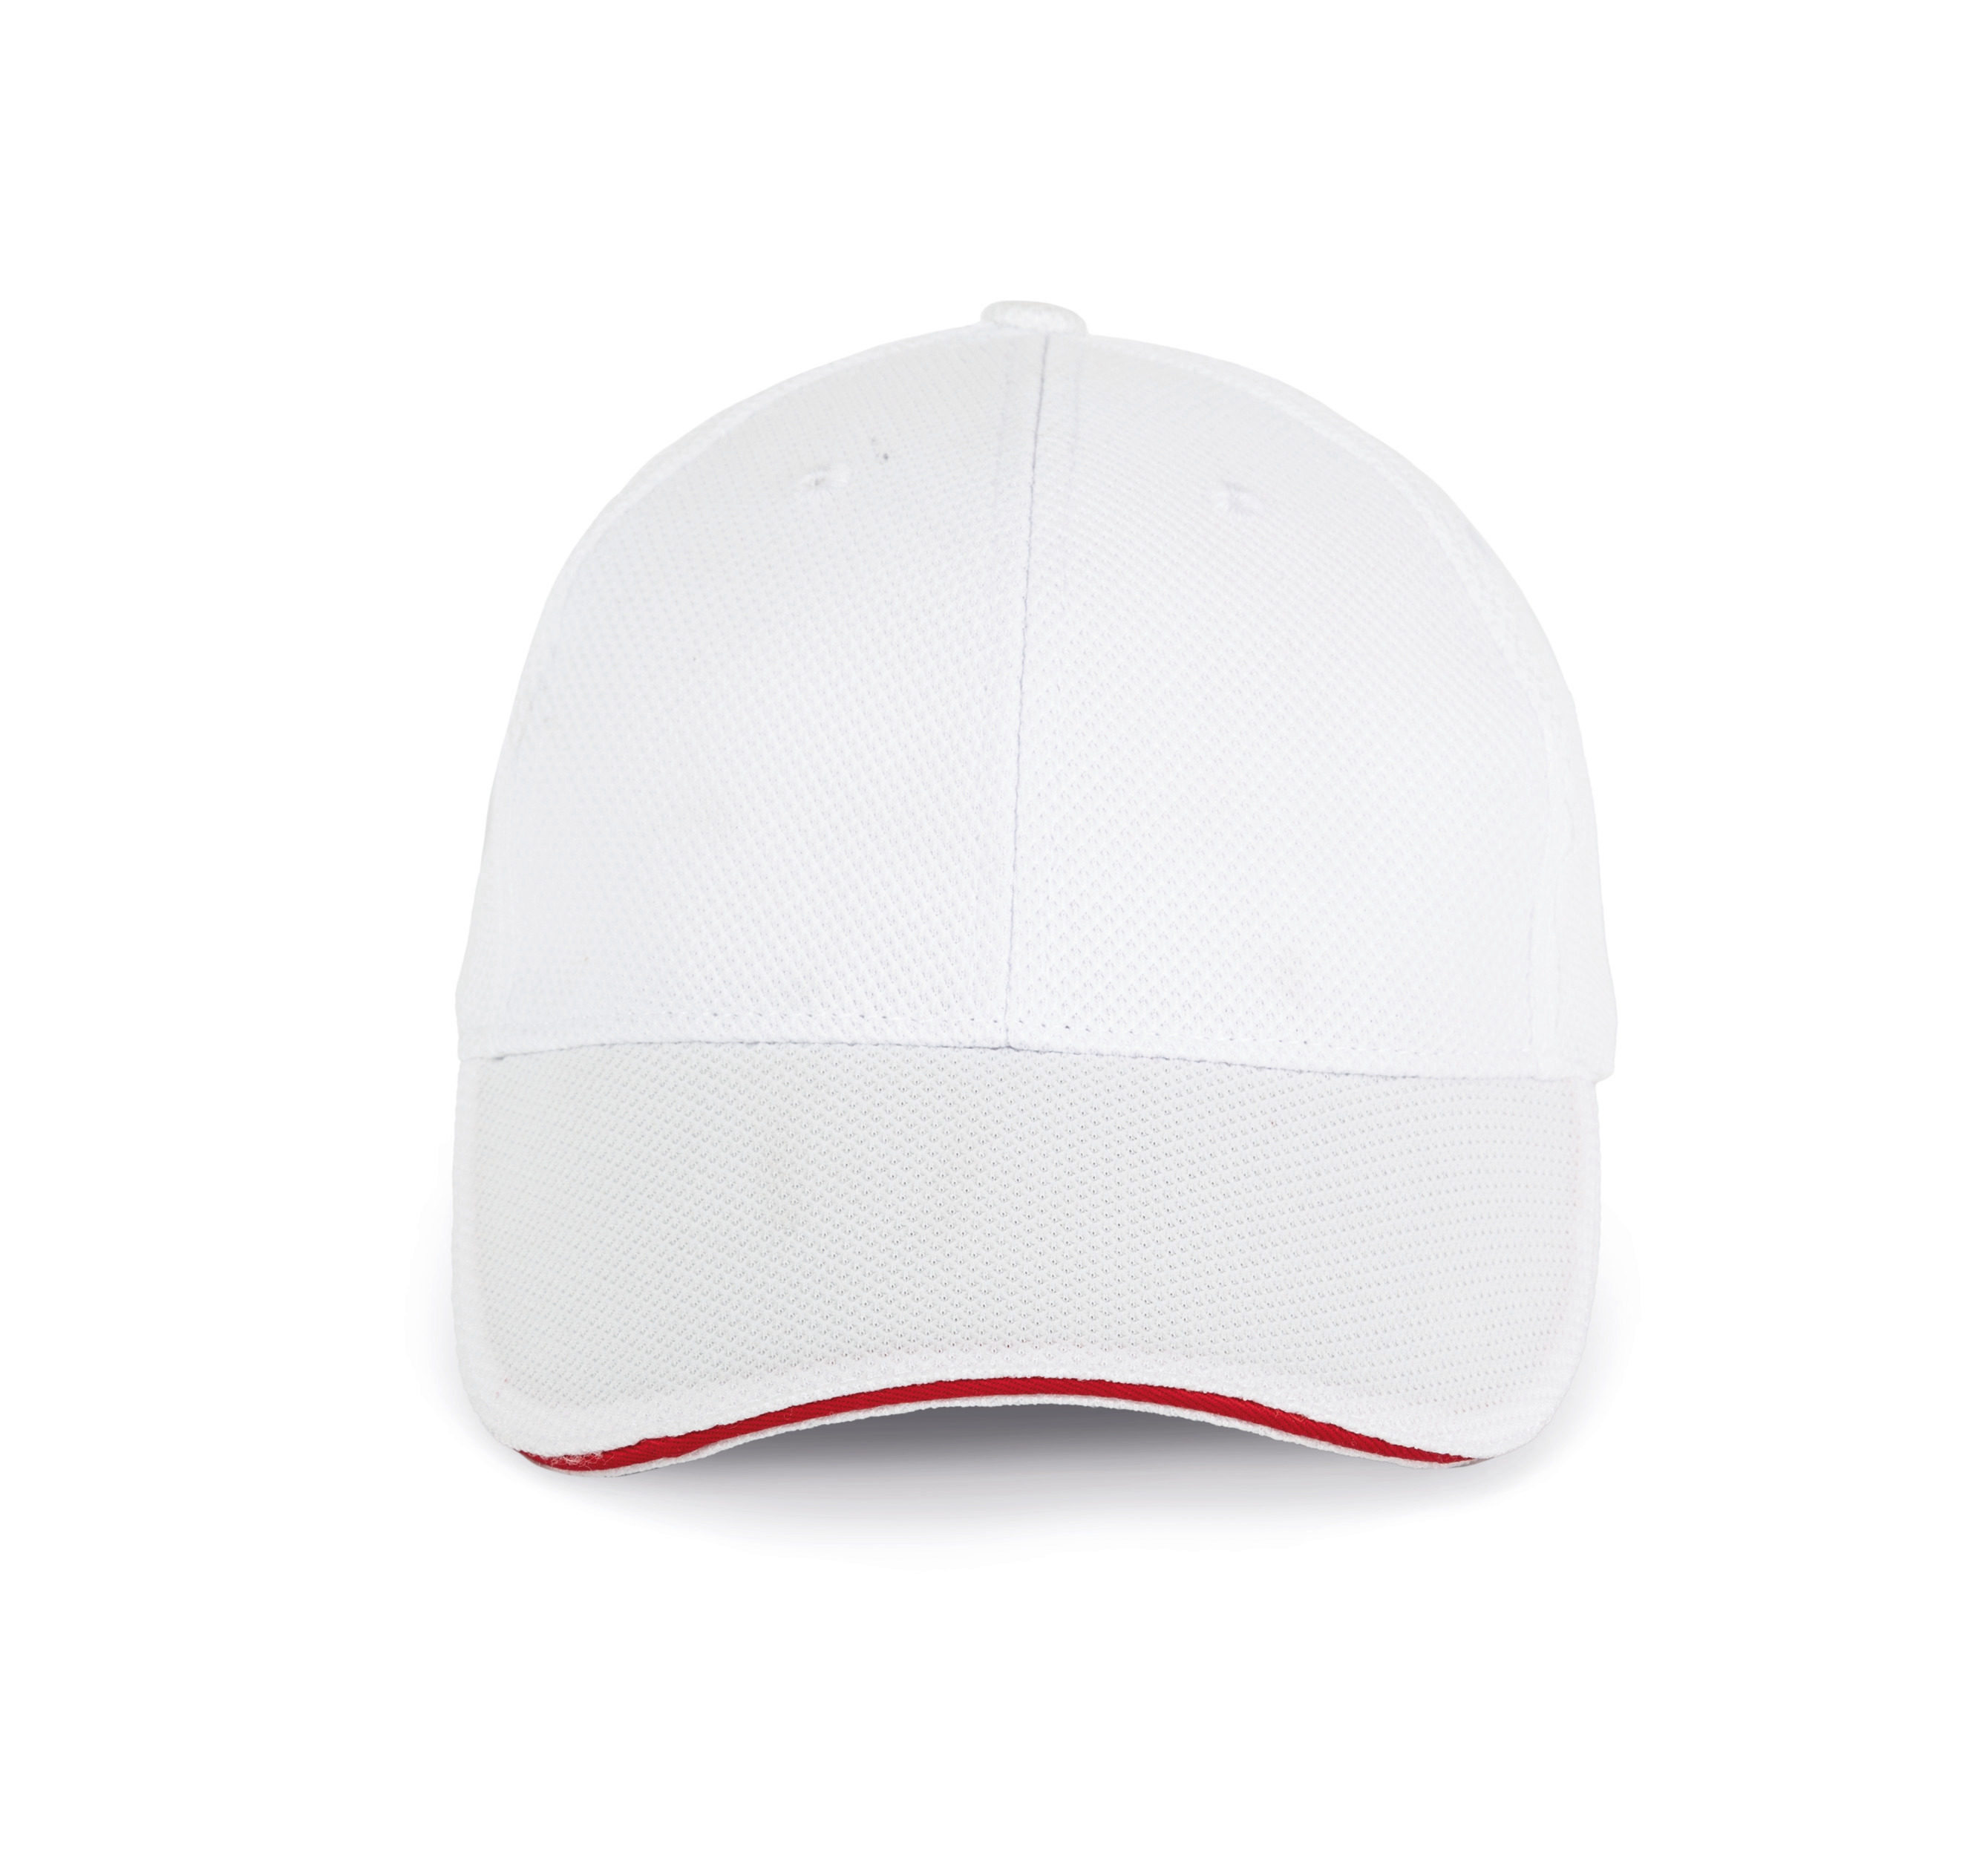 PS_KP207-2_WHITE-RED